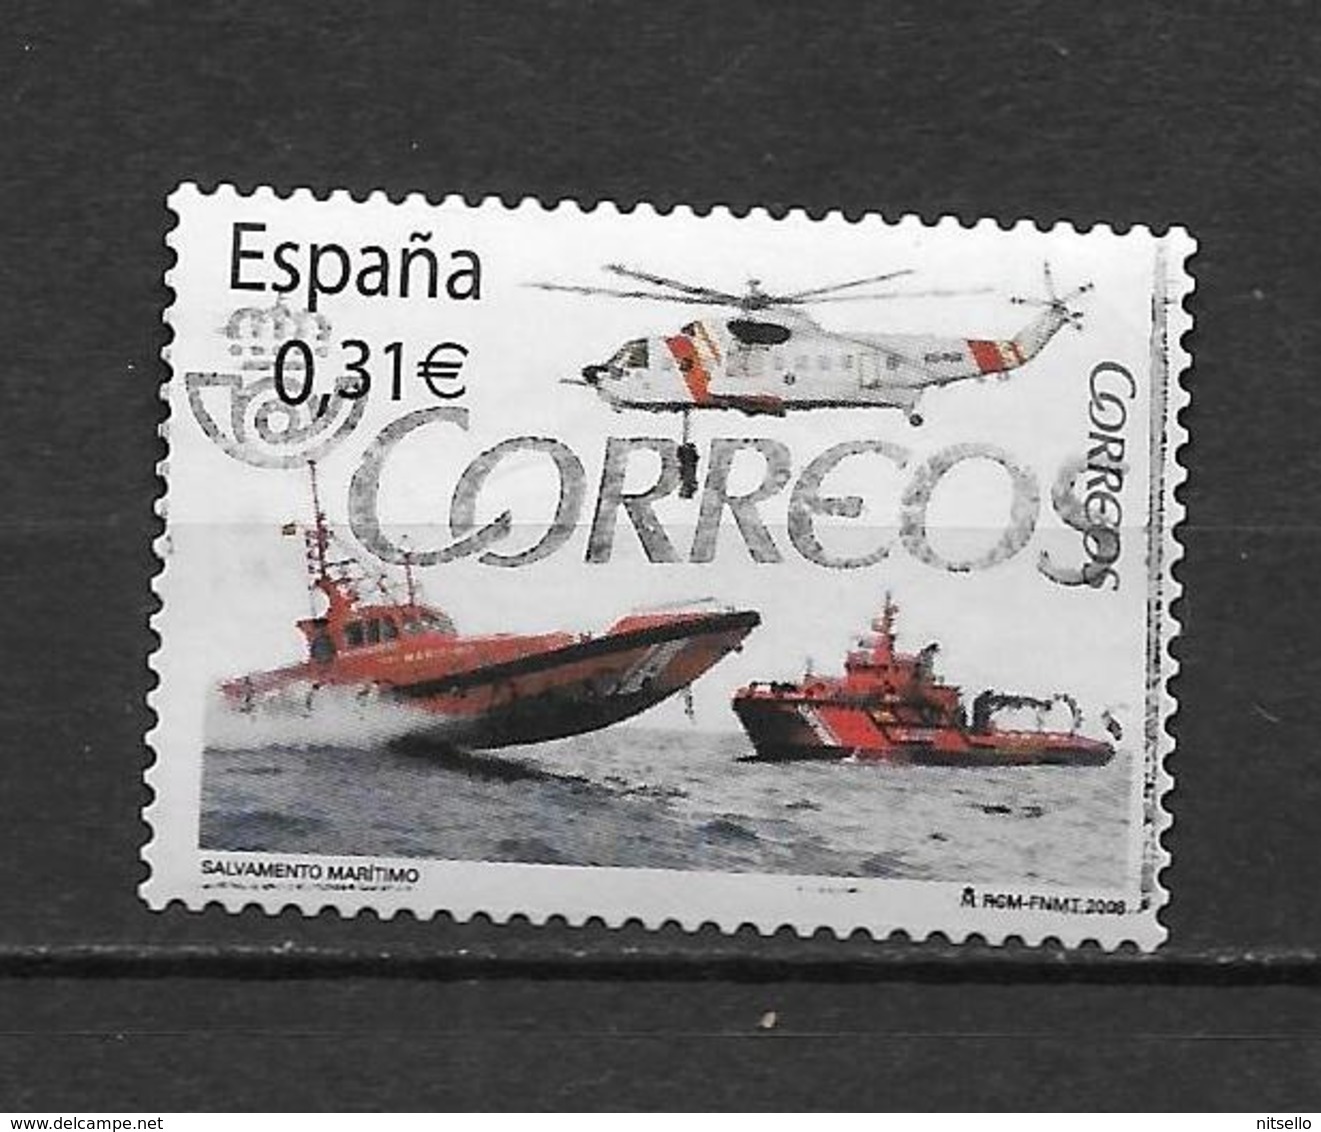 LOTE 1822  ///  ESPAÑA AÑO 2008 - Used Stamps